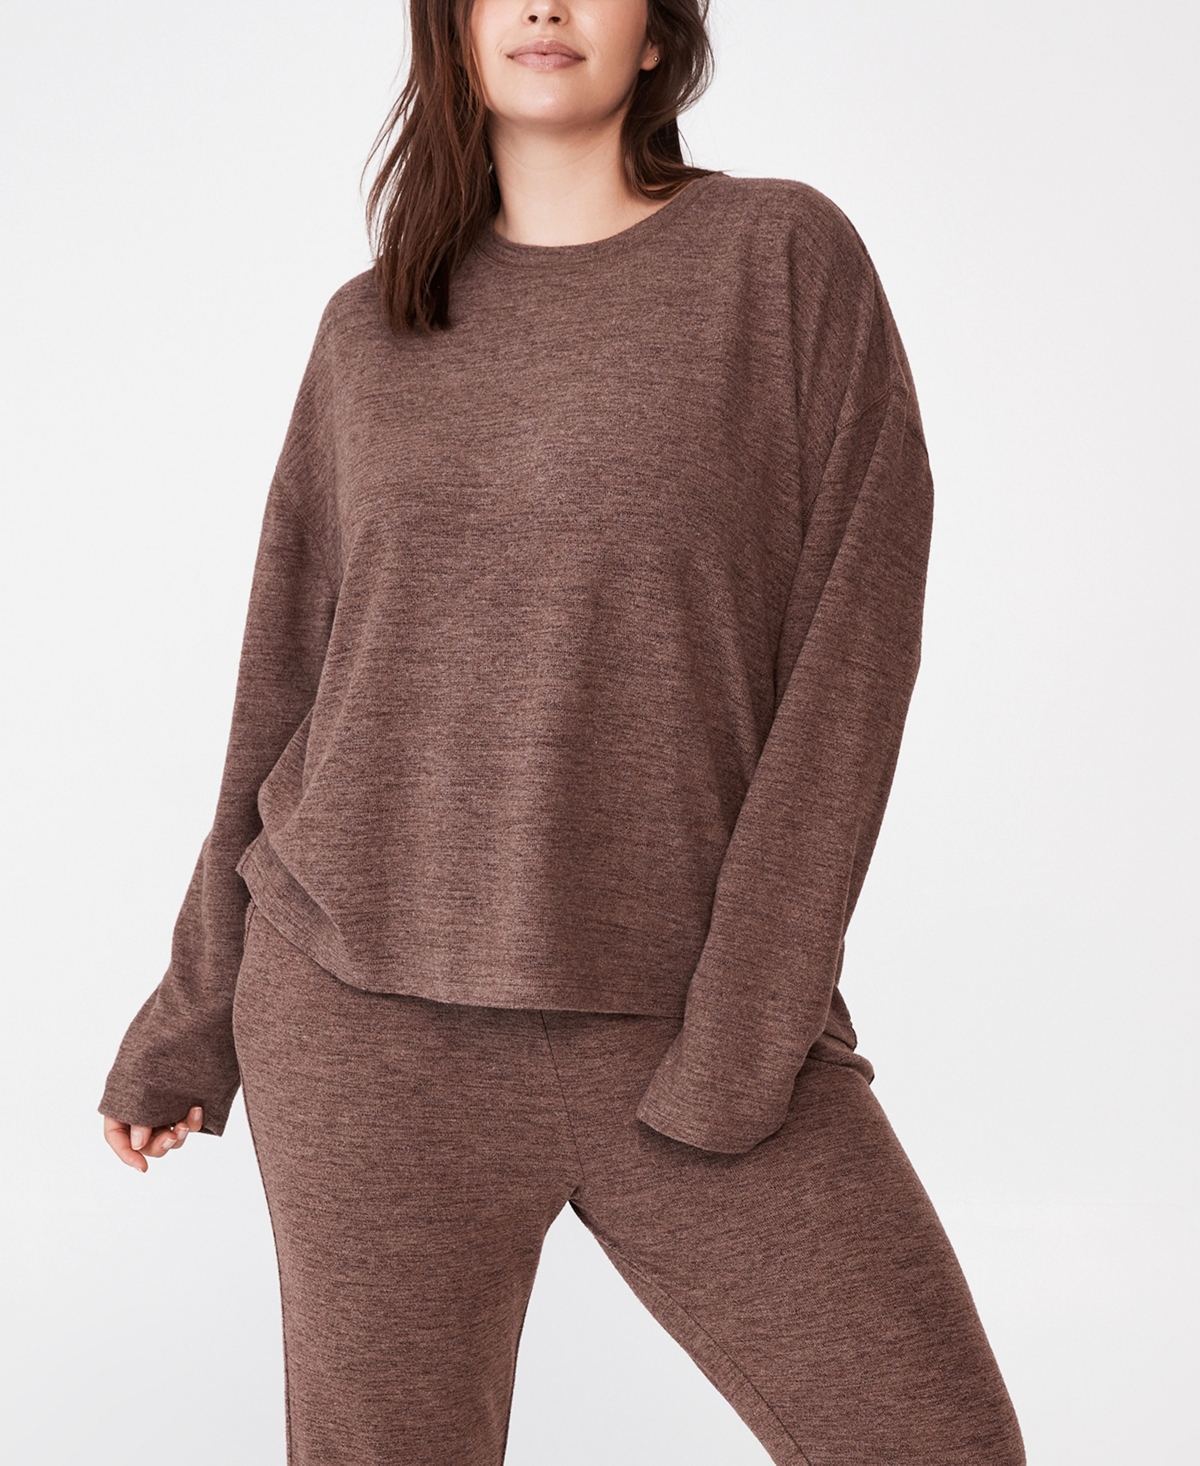 Cotton On Trendy Plus Size Supersoft Long Sleeve Relaxed Crew Sweater